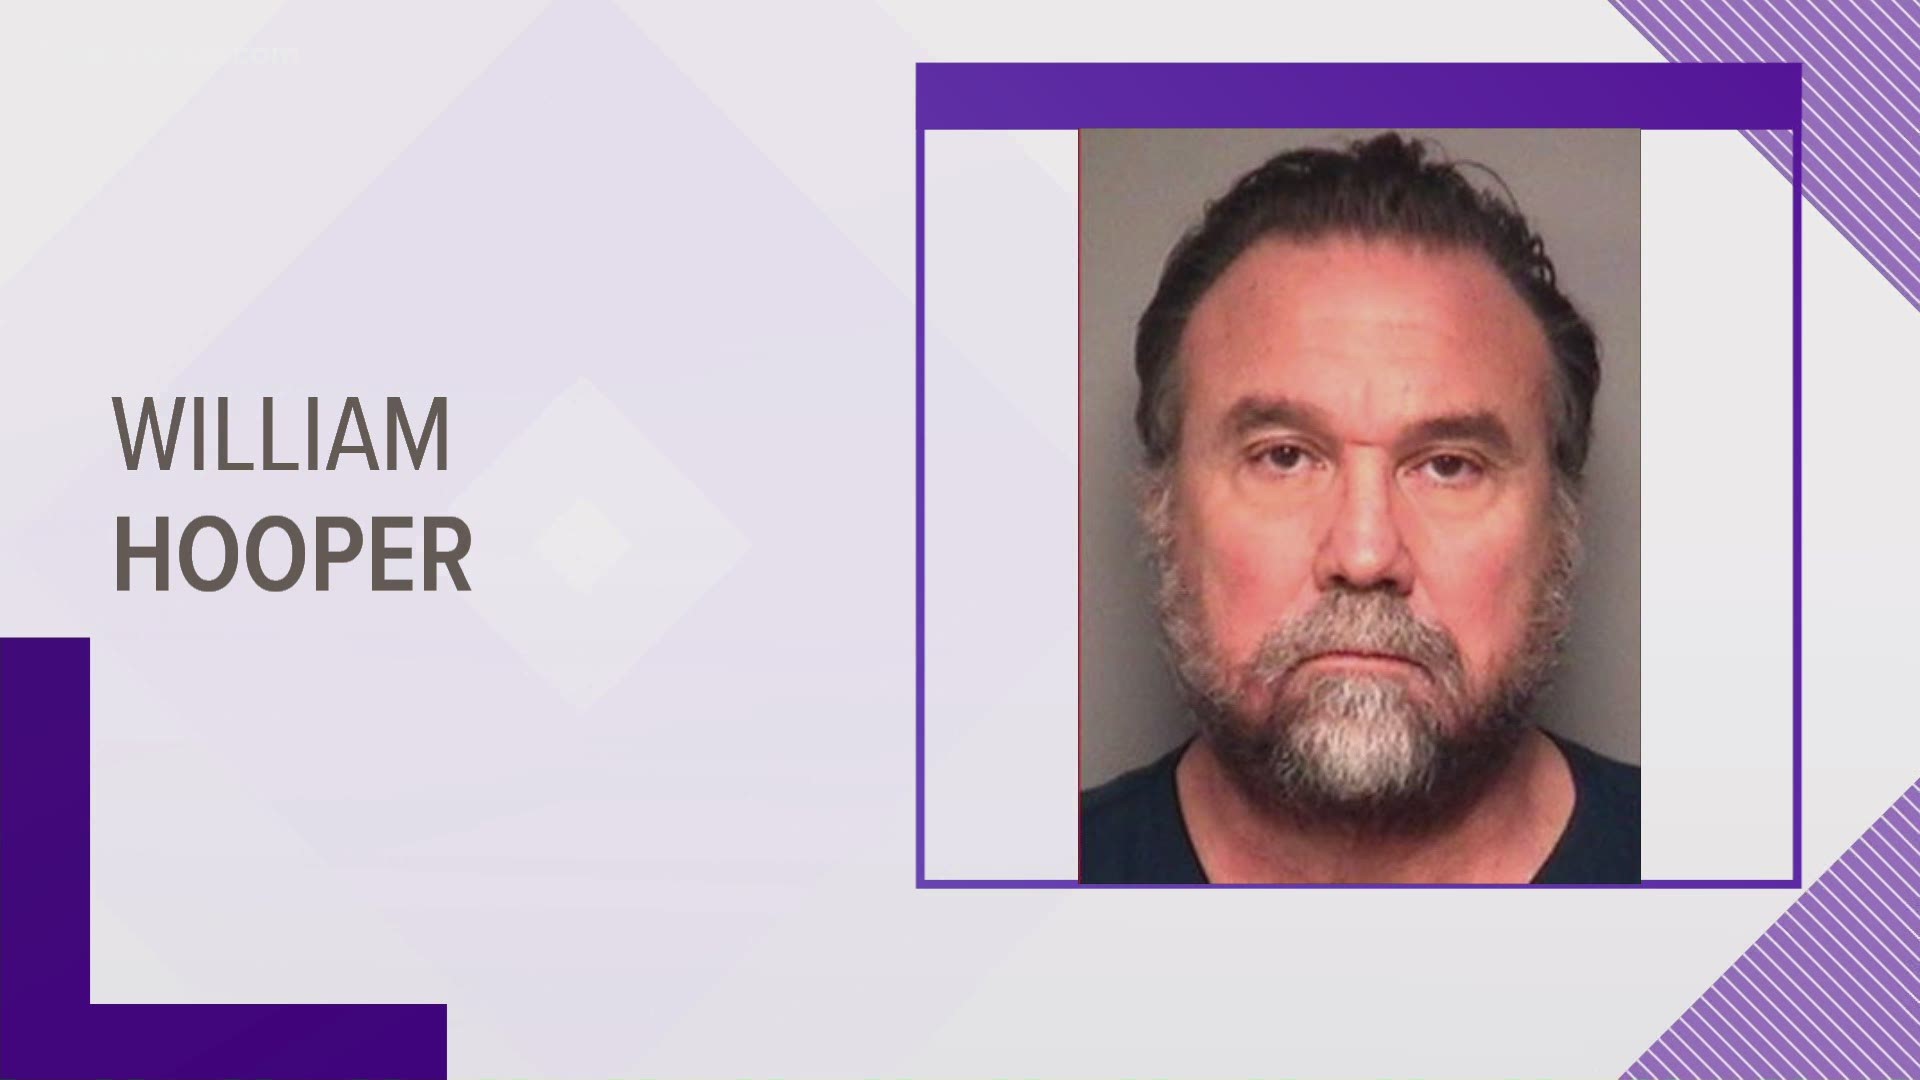 William Hooper was sentenced to life in prison for engaging in a conspiracy to produce child porn images.